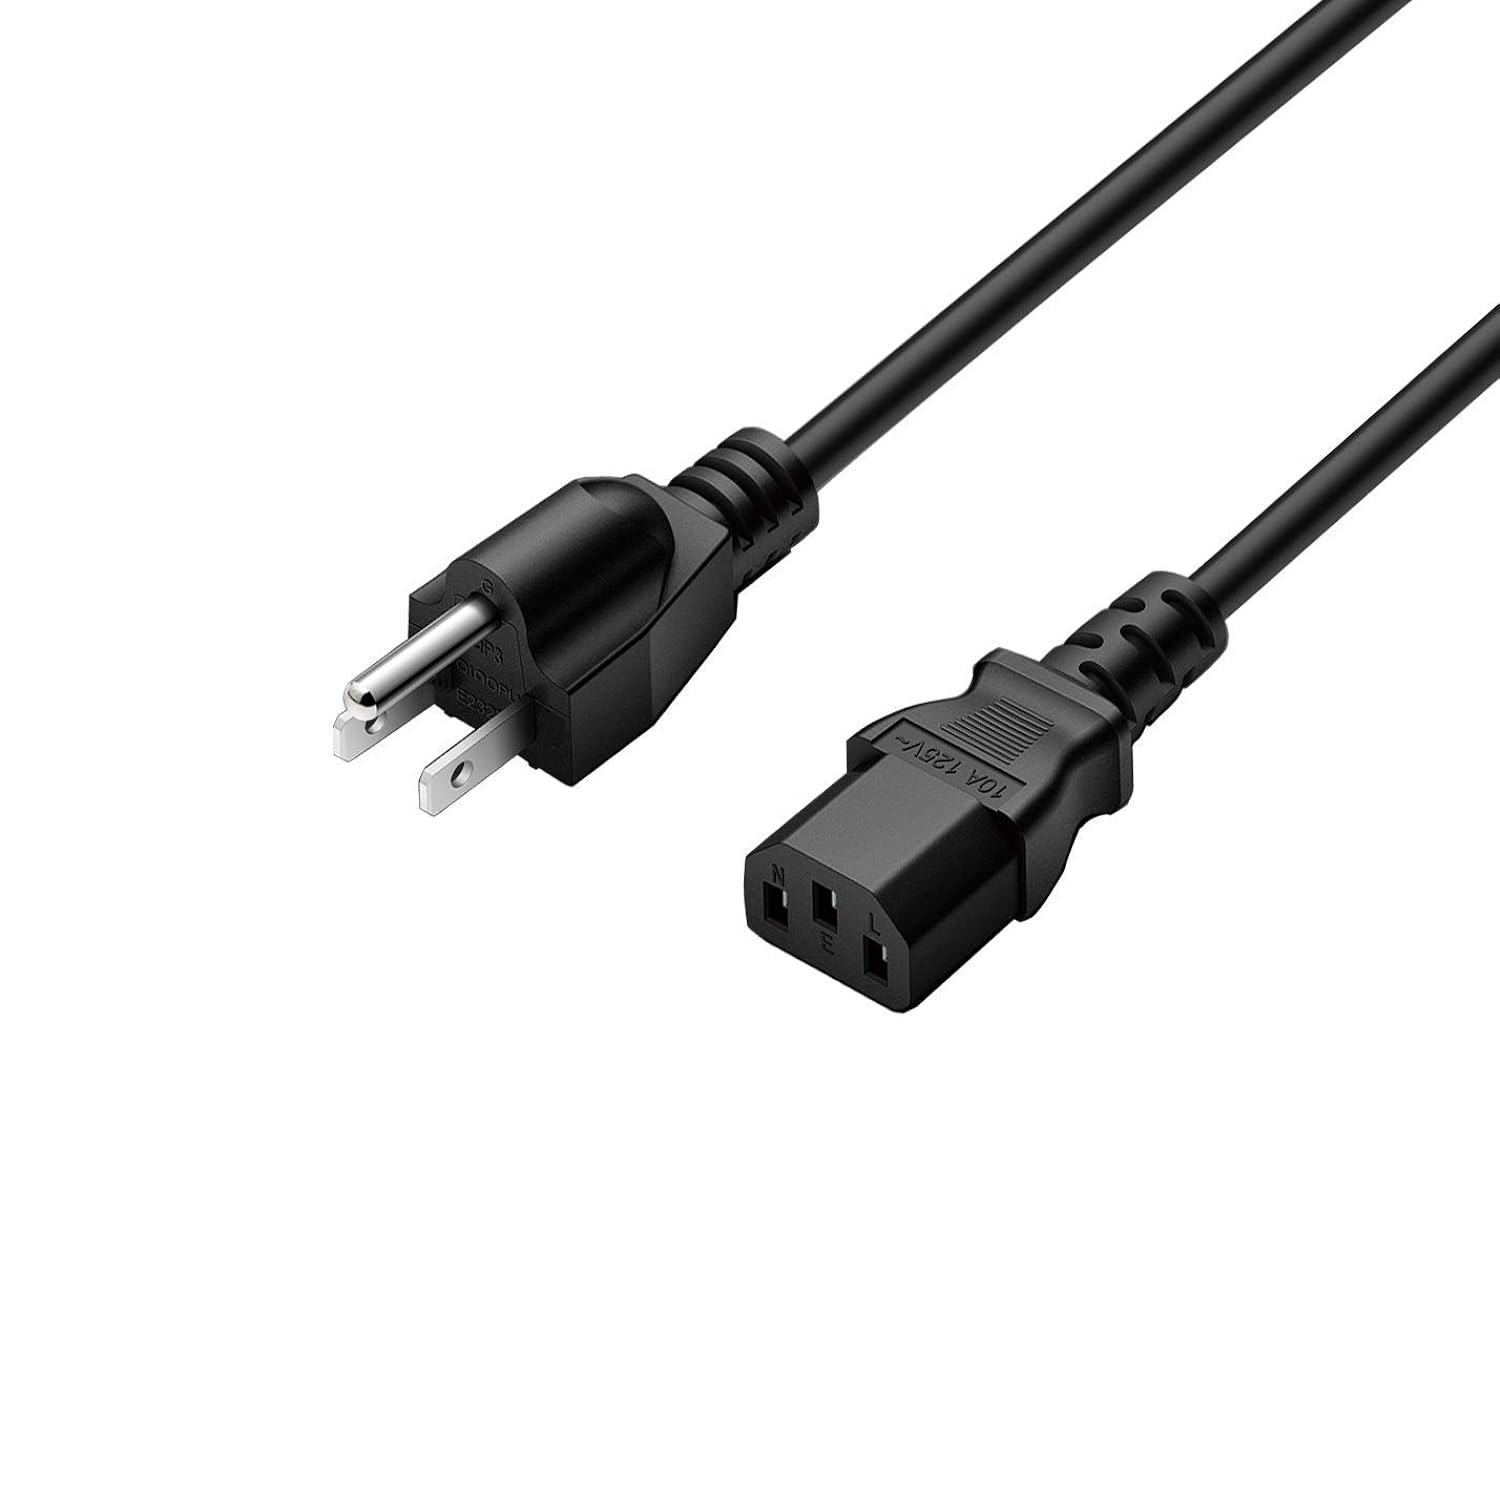 thinkstar Power Cable Fit For Amplifier Musical Peavey Vox Guitar Amp Pc Ac Amplifiers 18 Awg Universal 3 Prong Replacement Power Cord …